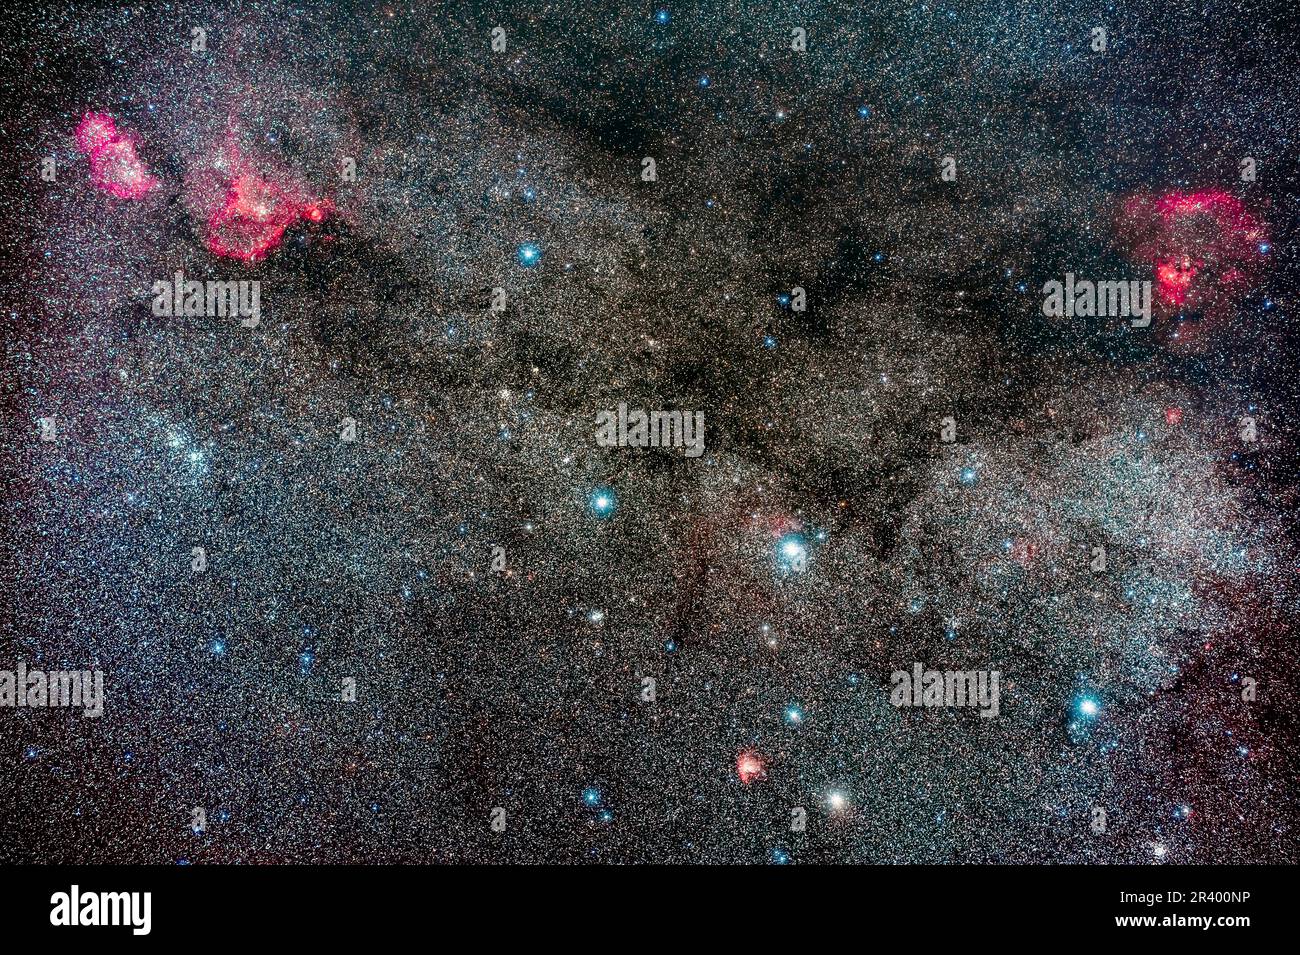 Various star clusters and emission nebulae in the constellation of Cassiopeia. Stock Photo